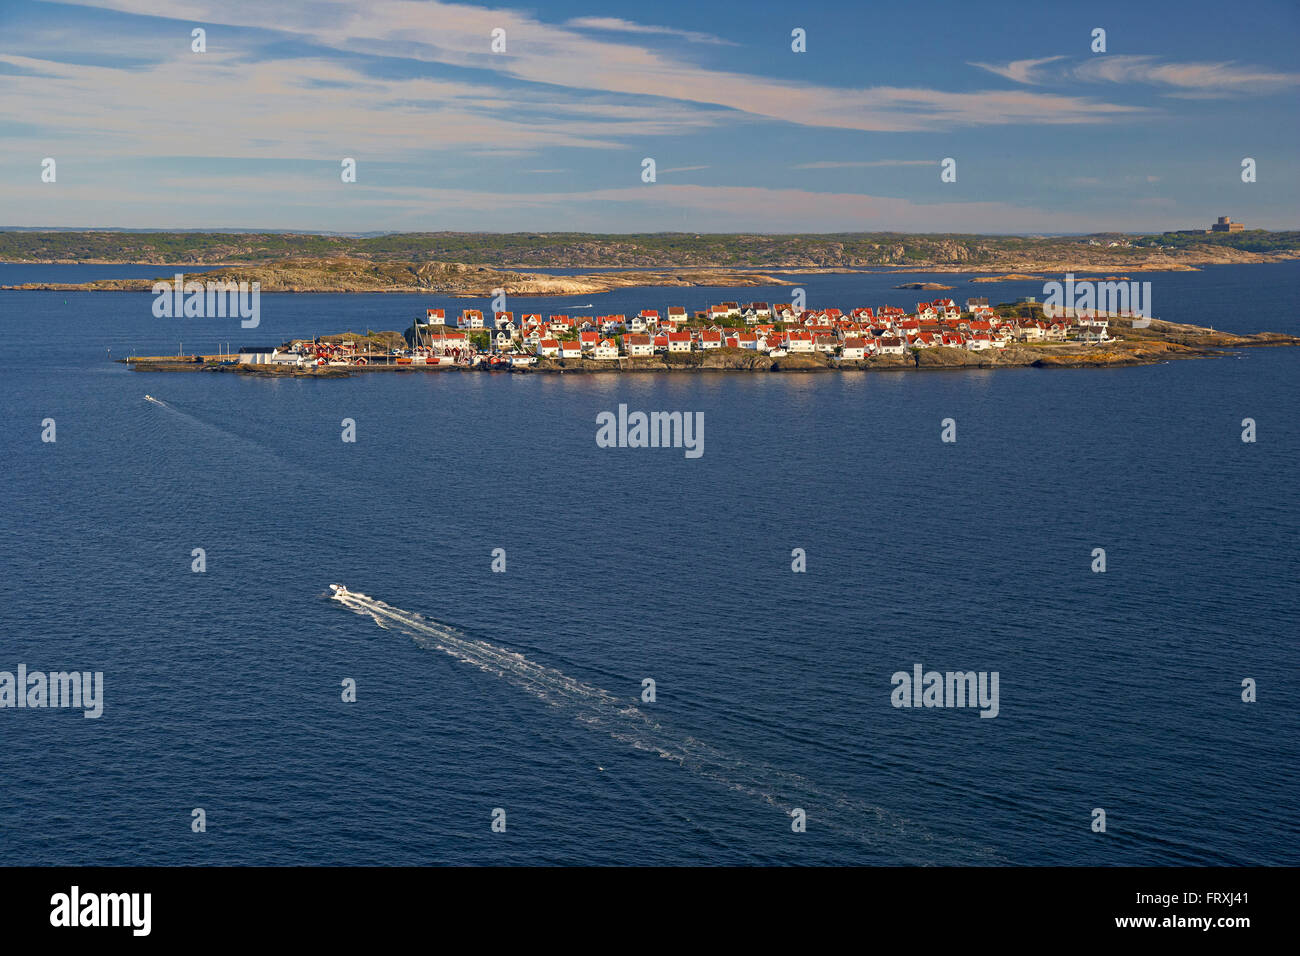 View from Ronnang on Tjoern Island to Astol Island, in the front and Istoen Island with Marstrand in the background, Province of Bohuslaen, West coast, Sweden, Europe Stock Photo